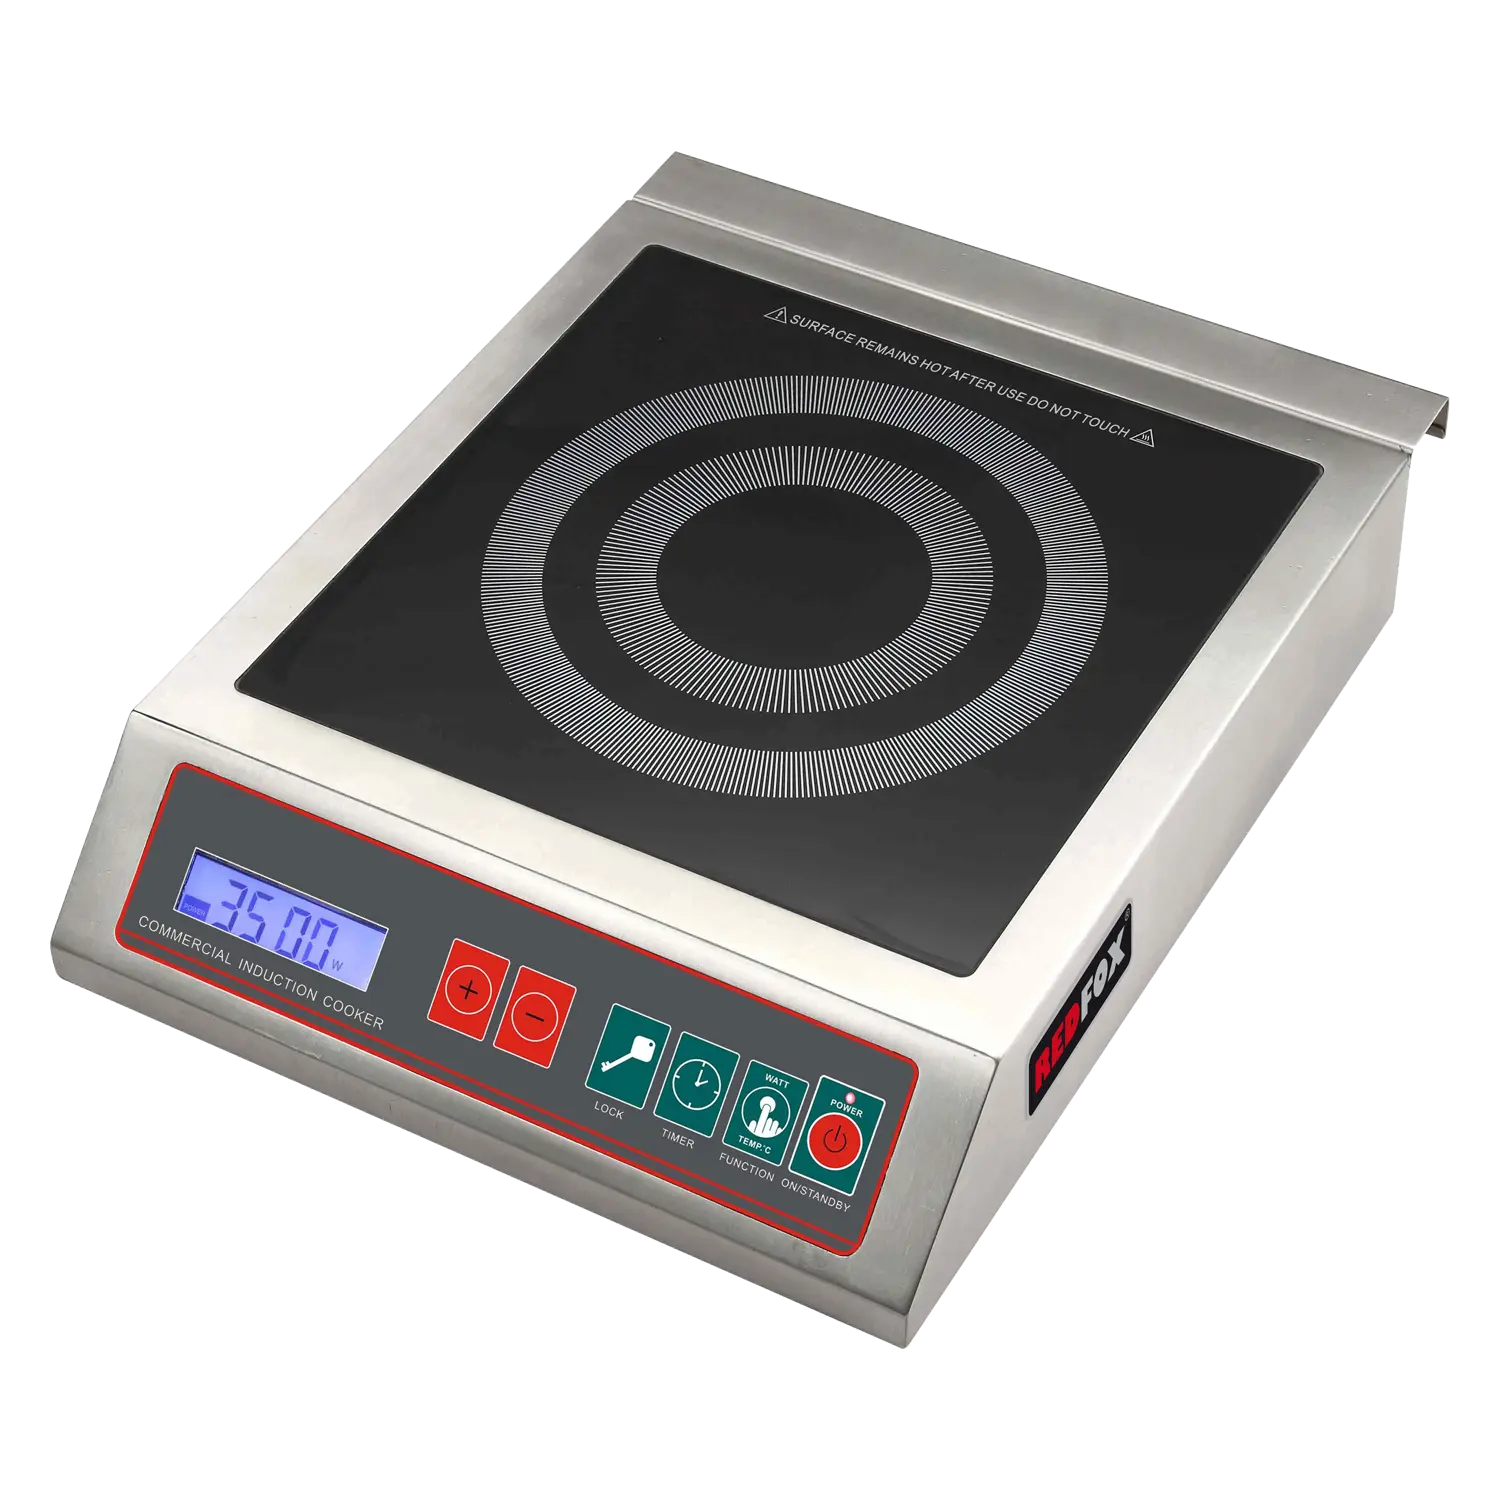 Induction table electric cooker 12 performance levels digi. control panel 230 V | REDFOX - RIB 3536 ET